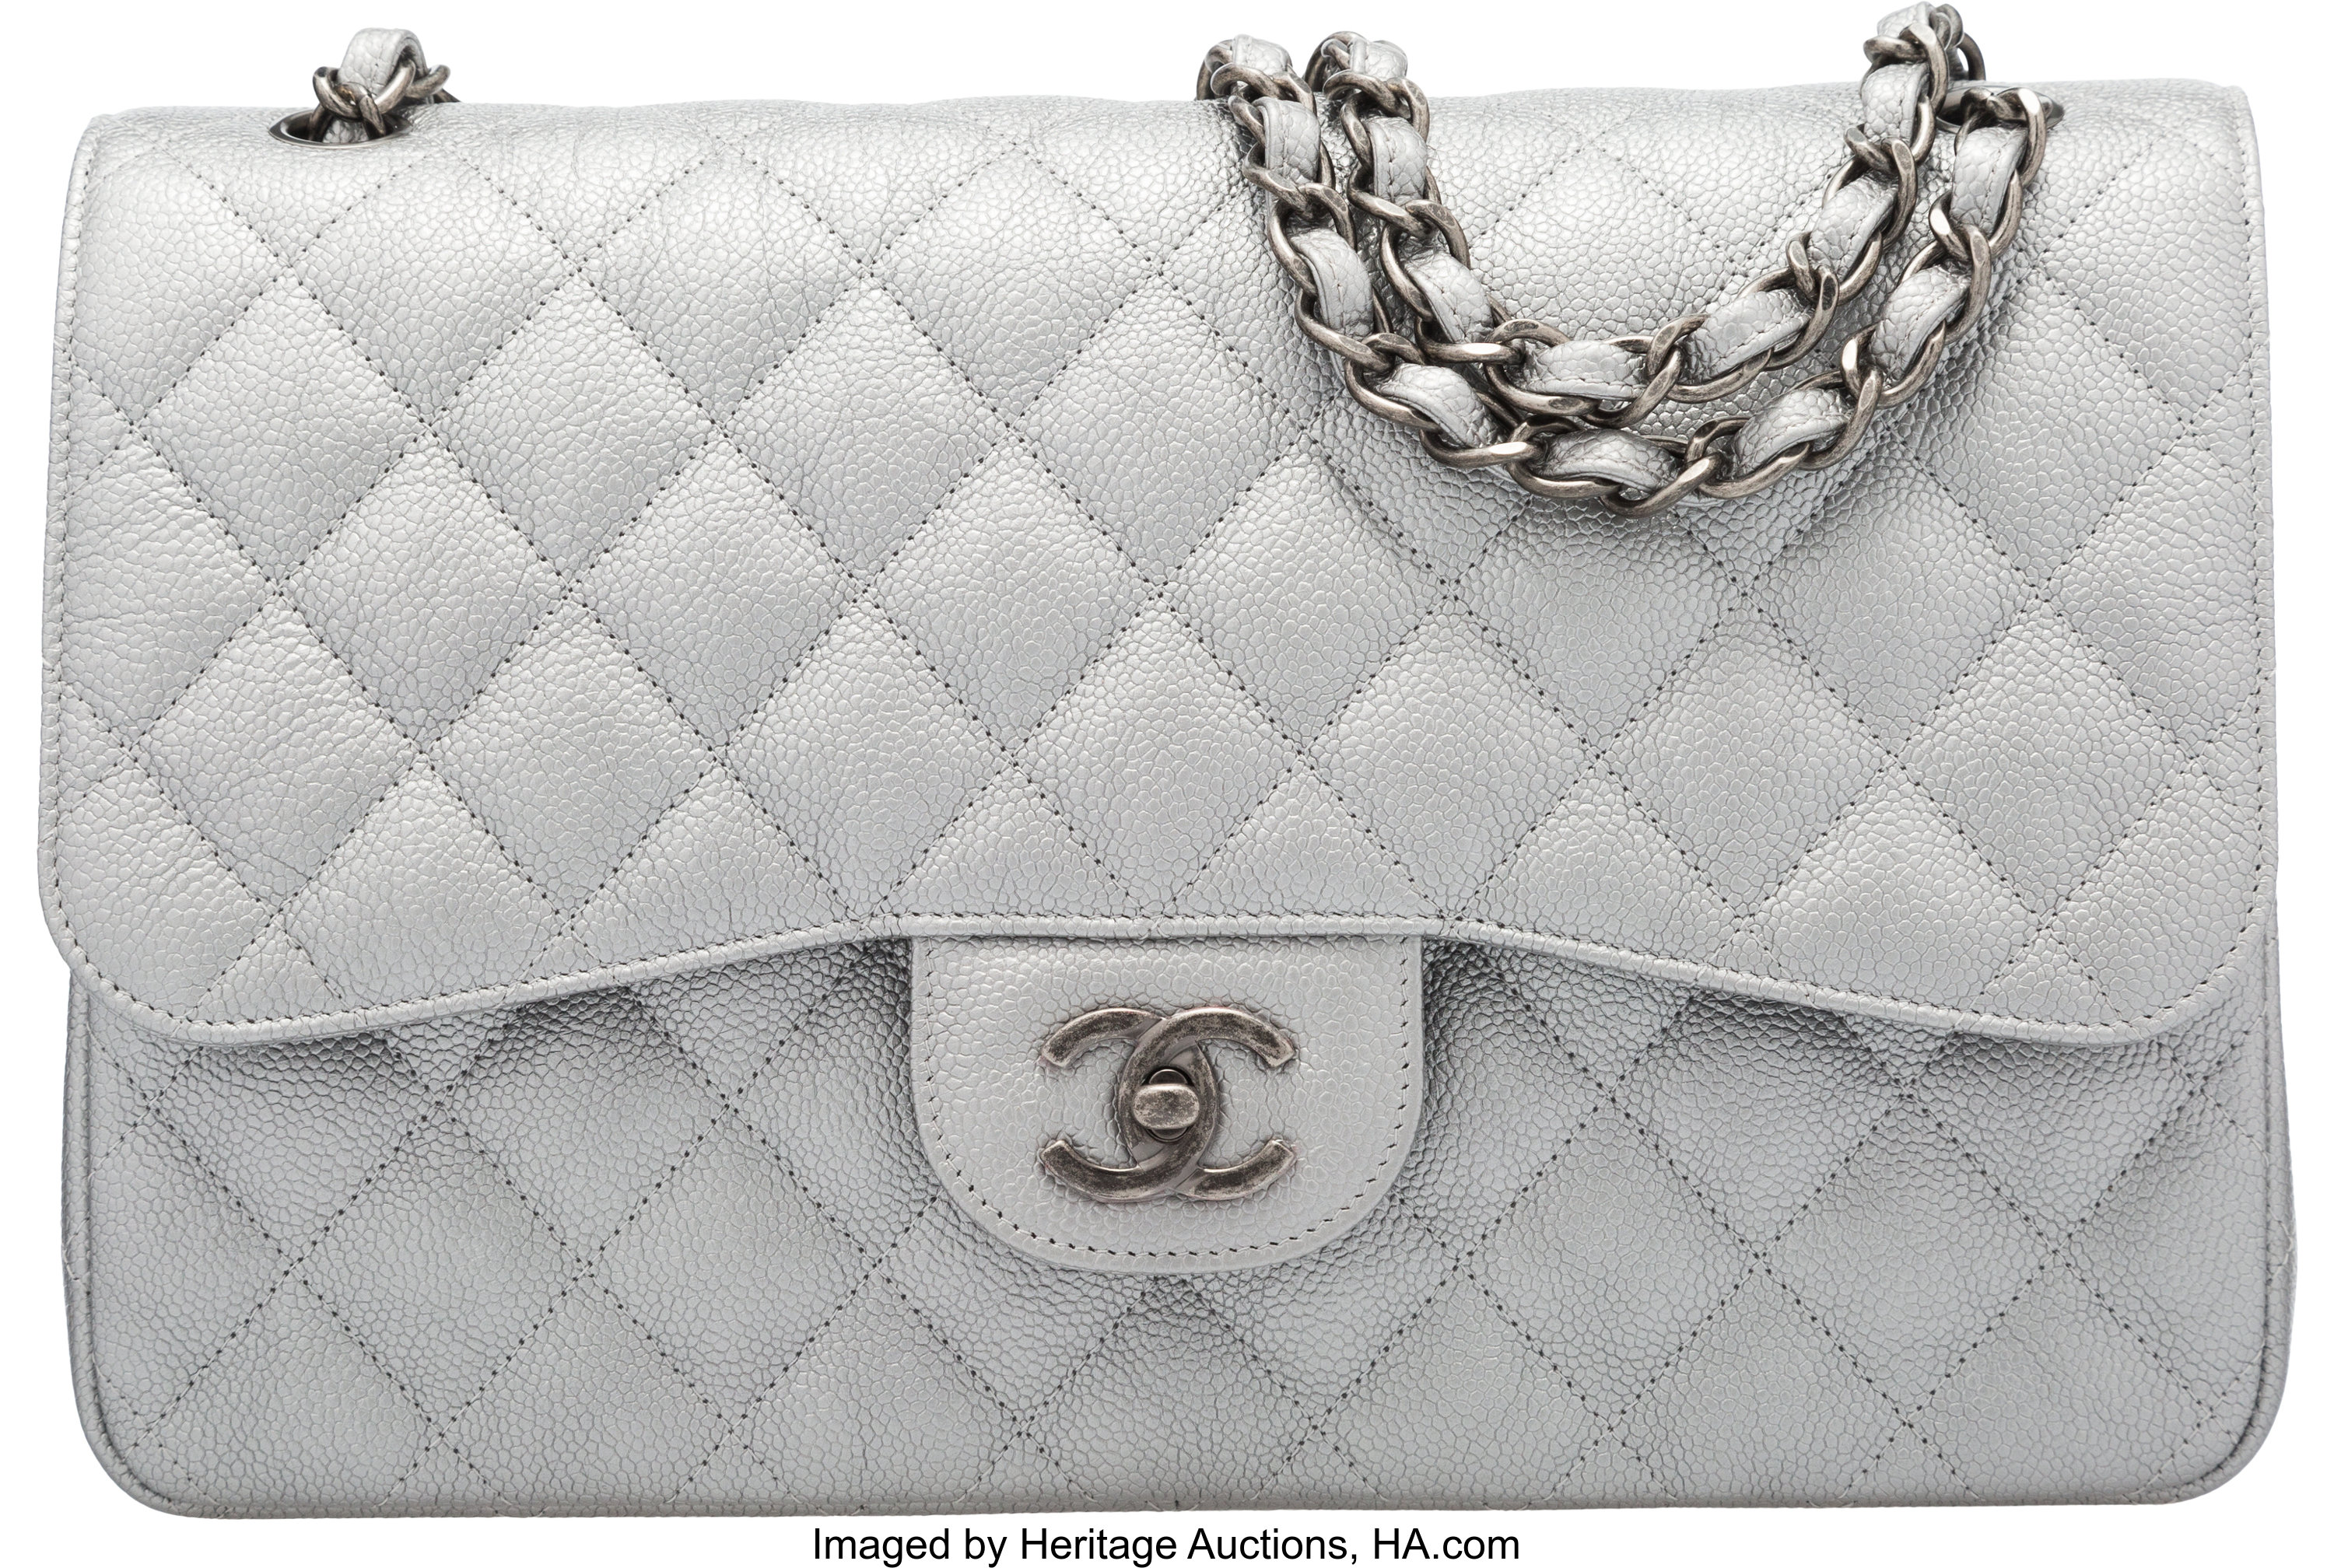 Chanel Silver Metallic Quilted Caviar Leather Double Flap Bag with